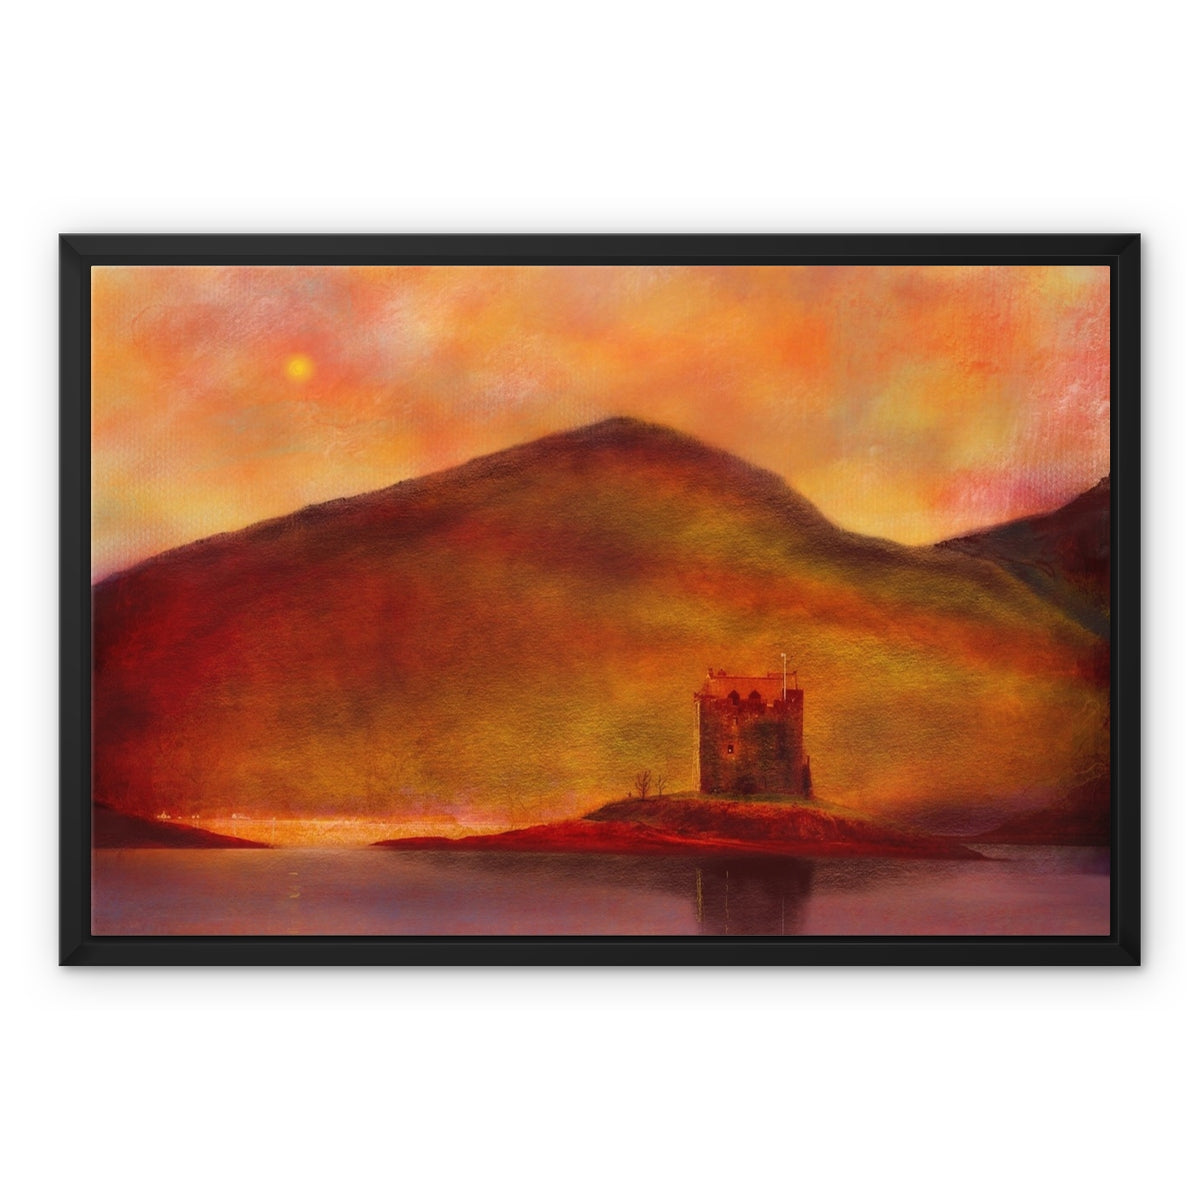 Castle Stalker Sunset Painting | Framed Canvas From Scotland-Floating Framed Canvas Prints-Historic & Iconic Scotland Art Gallery-24"x18"-Paintings, Prints, Homeware, Art Gifts From Scotland By Scottish Artist Kevin Hunter